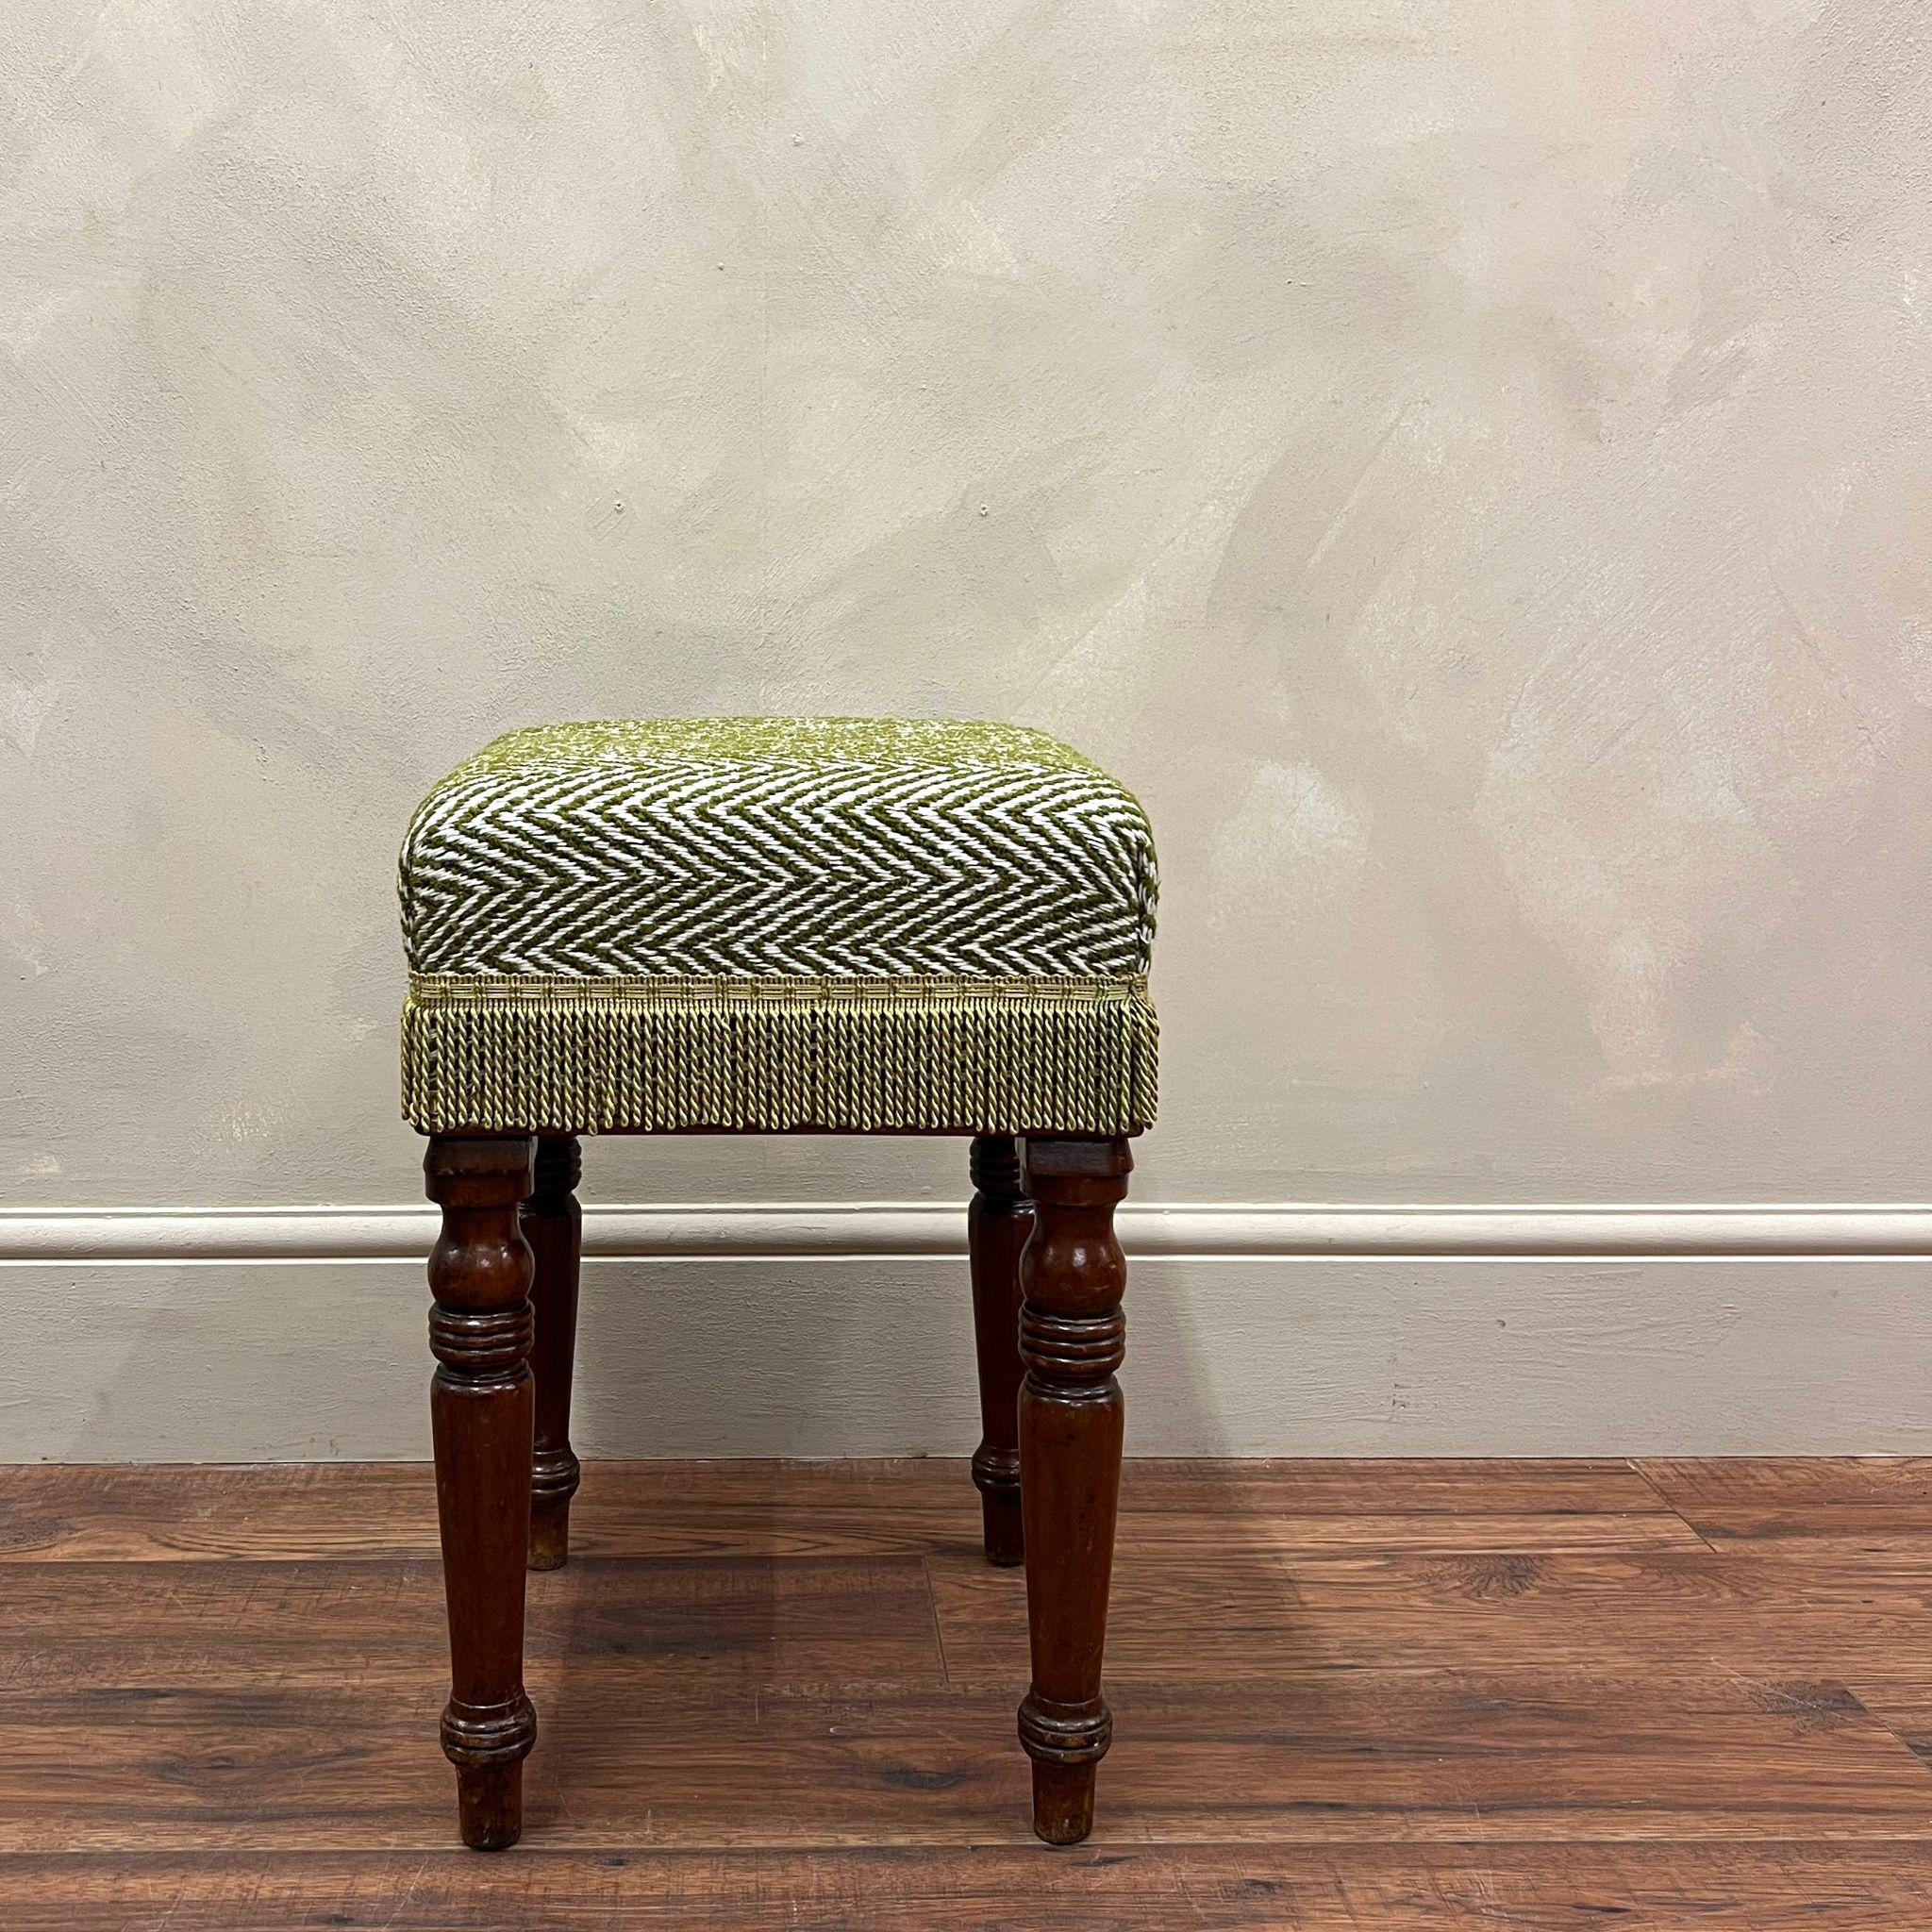 Recently upholstered in quality chevron weave fabric with complimenting tassles.
Wonderful  turned leg frame.

England, circa 1880.

Height - 52 cm
Top - 36 cm x 33 cm 
Please message if any further info or photos are required 

We are happy to work